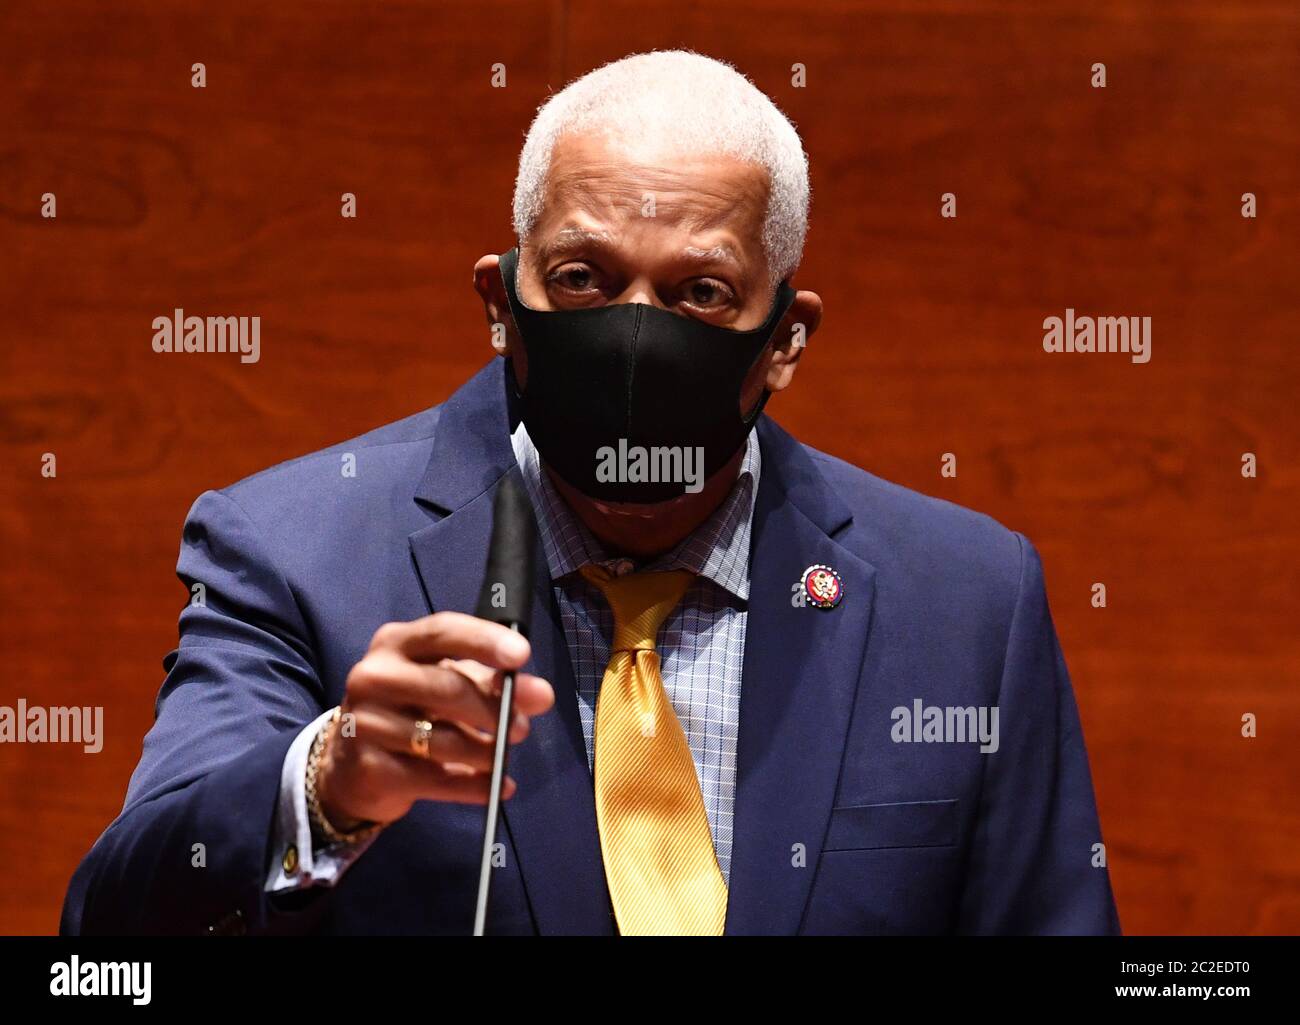 Washington, United States. 17th June, 2020. Democratic Representative from Georgia Henry Johnson adjusts a microphone at a House Judiciary Committee markup of H.R. 7120, the 'Justice in Policing Act of 2020,' on Capitol Hill in Washington, DC on Wednesday, June 17, 2020. The bill reforms policing in the United States and it includes provisions to stop police misconduct and the use of excessive force. Photo by Kevin Dietsch/UPI Credit: UPI/Alamy Live News Stock Photo